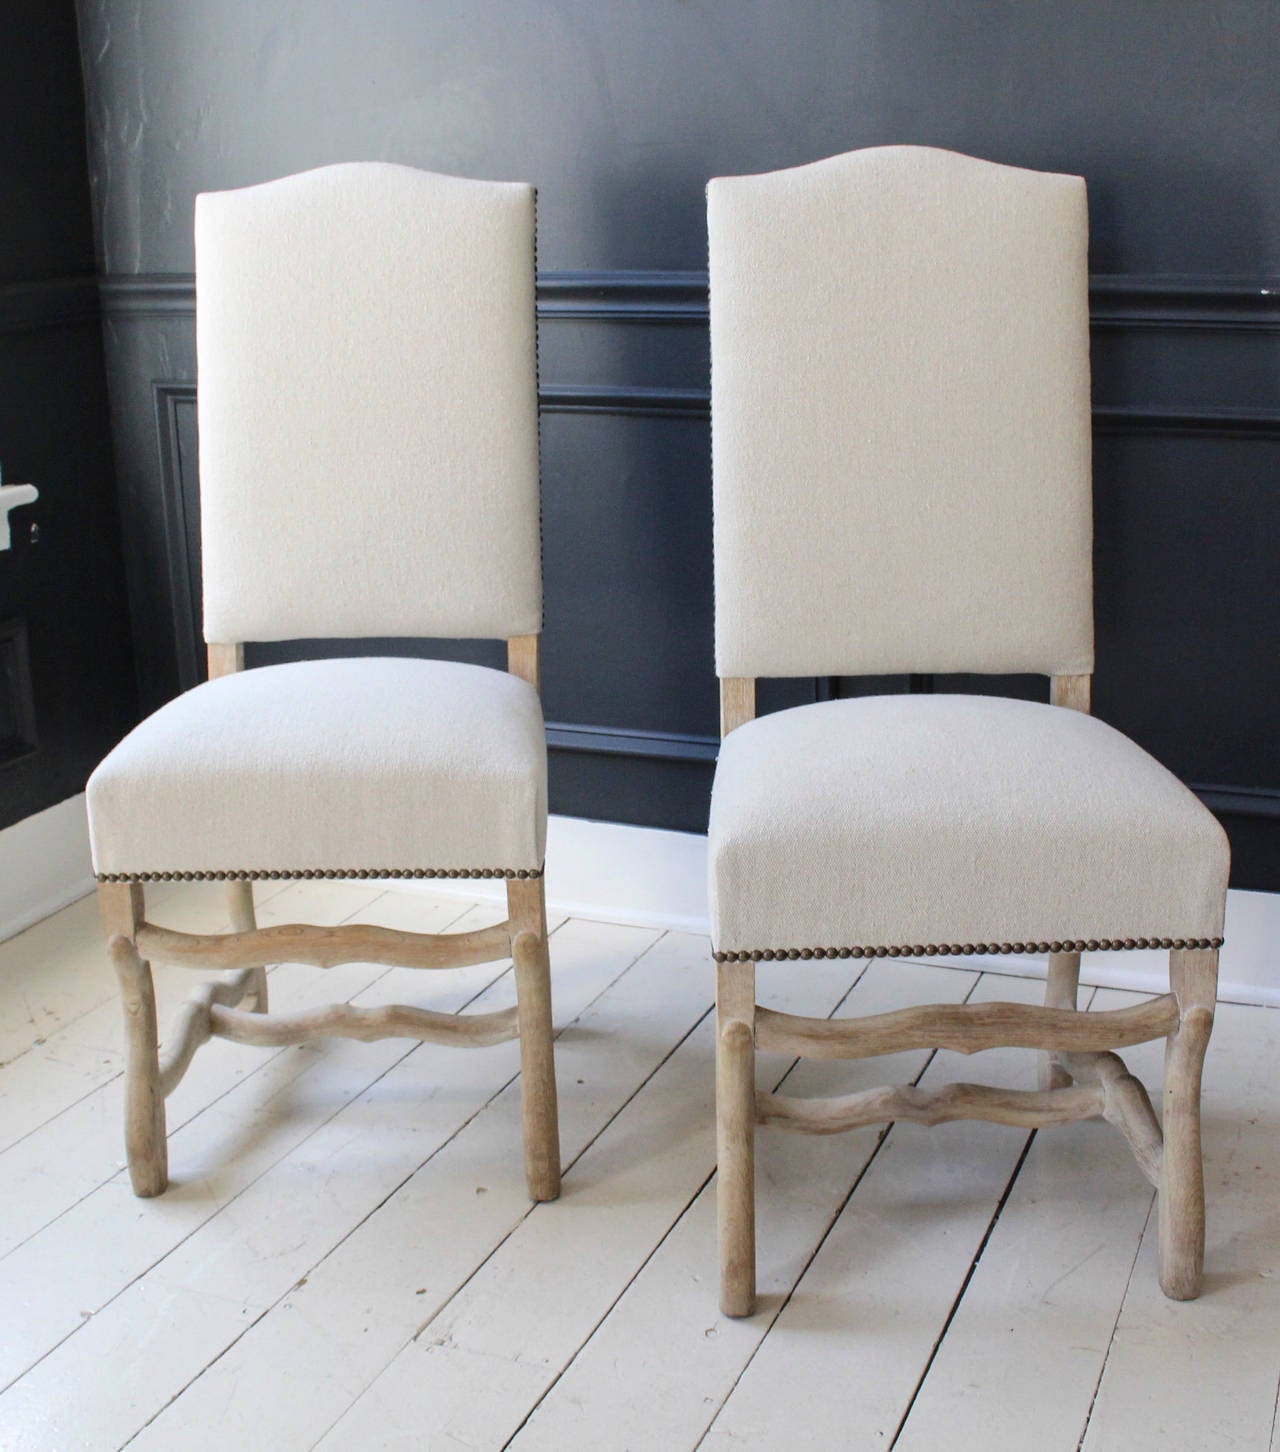 Set of six Os de Mouton dining chairs, early 20th century France, on bleached oak frames upholstered in natural textured cotton detailed with antiqued brass nailheads.